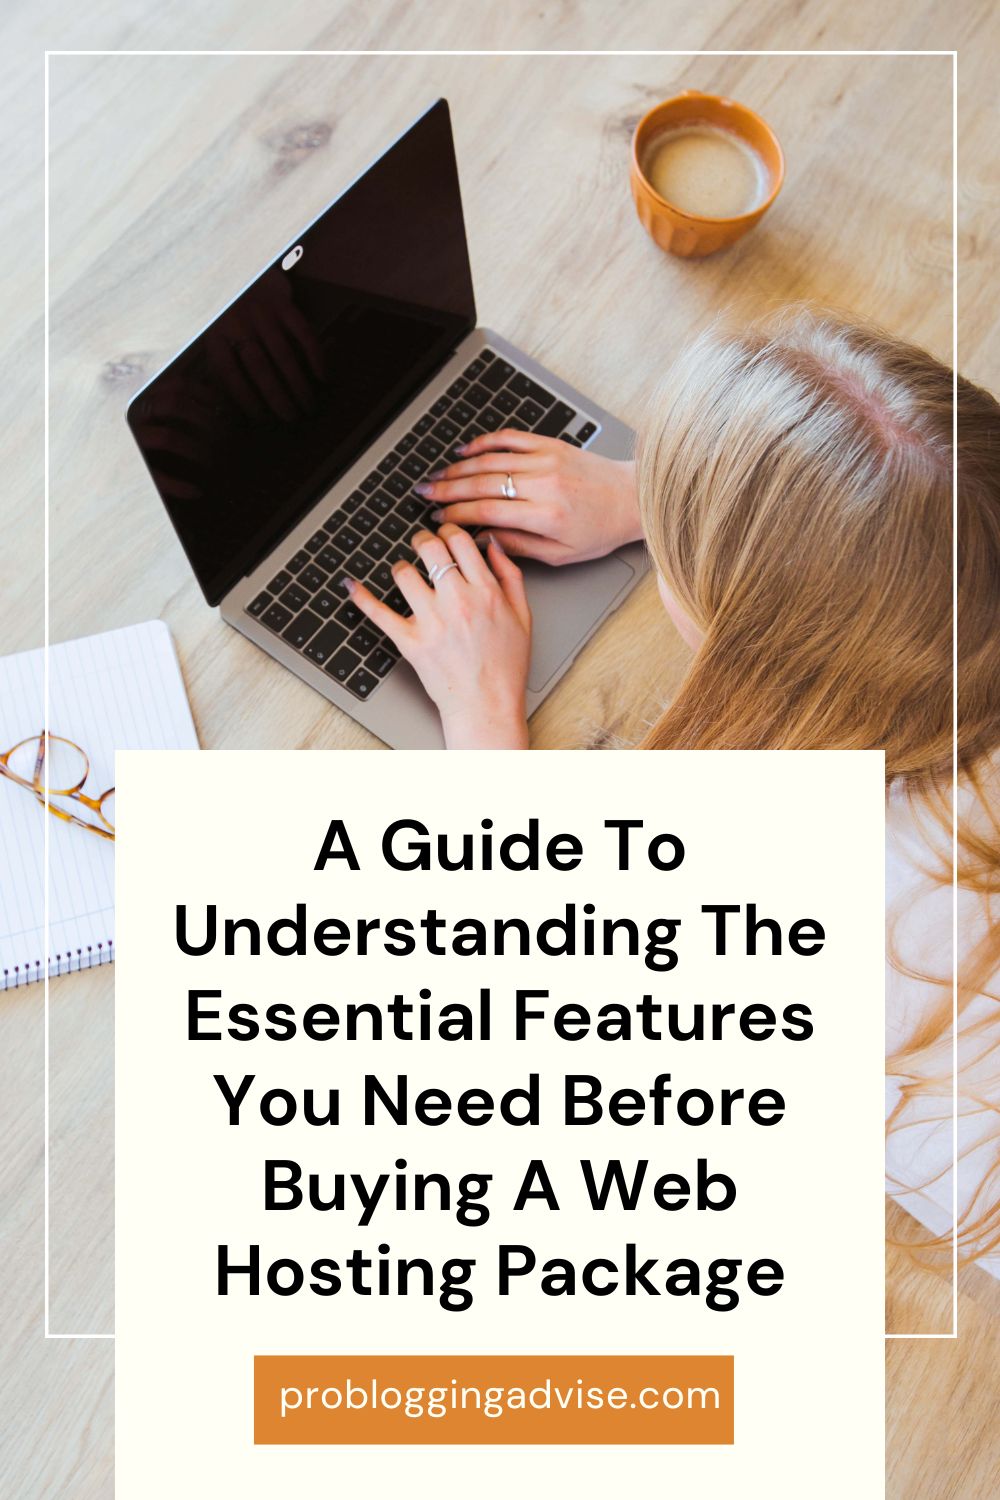 A Guide To Understanding The Essential Features You Need Before Buying A Web Hosting Package